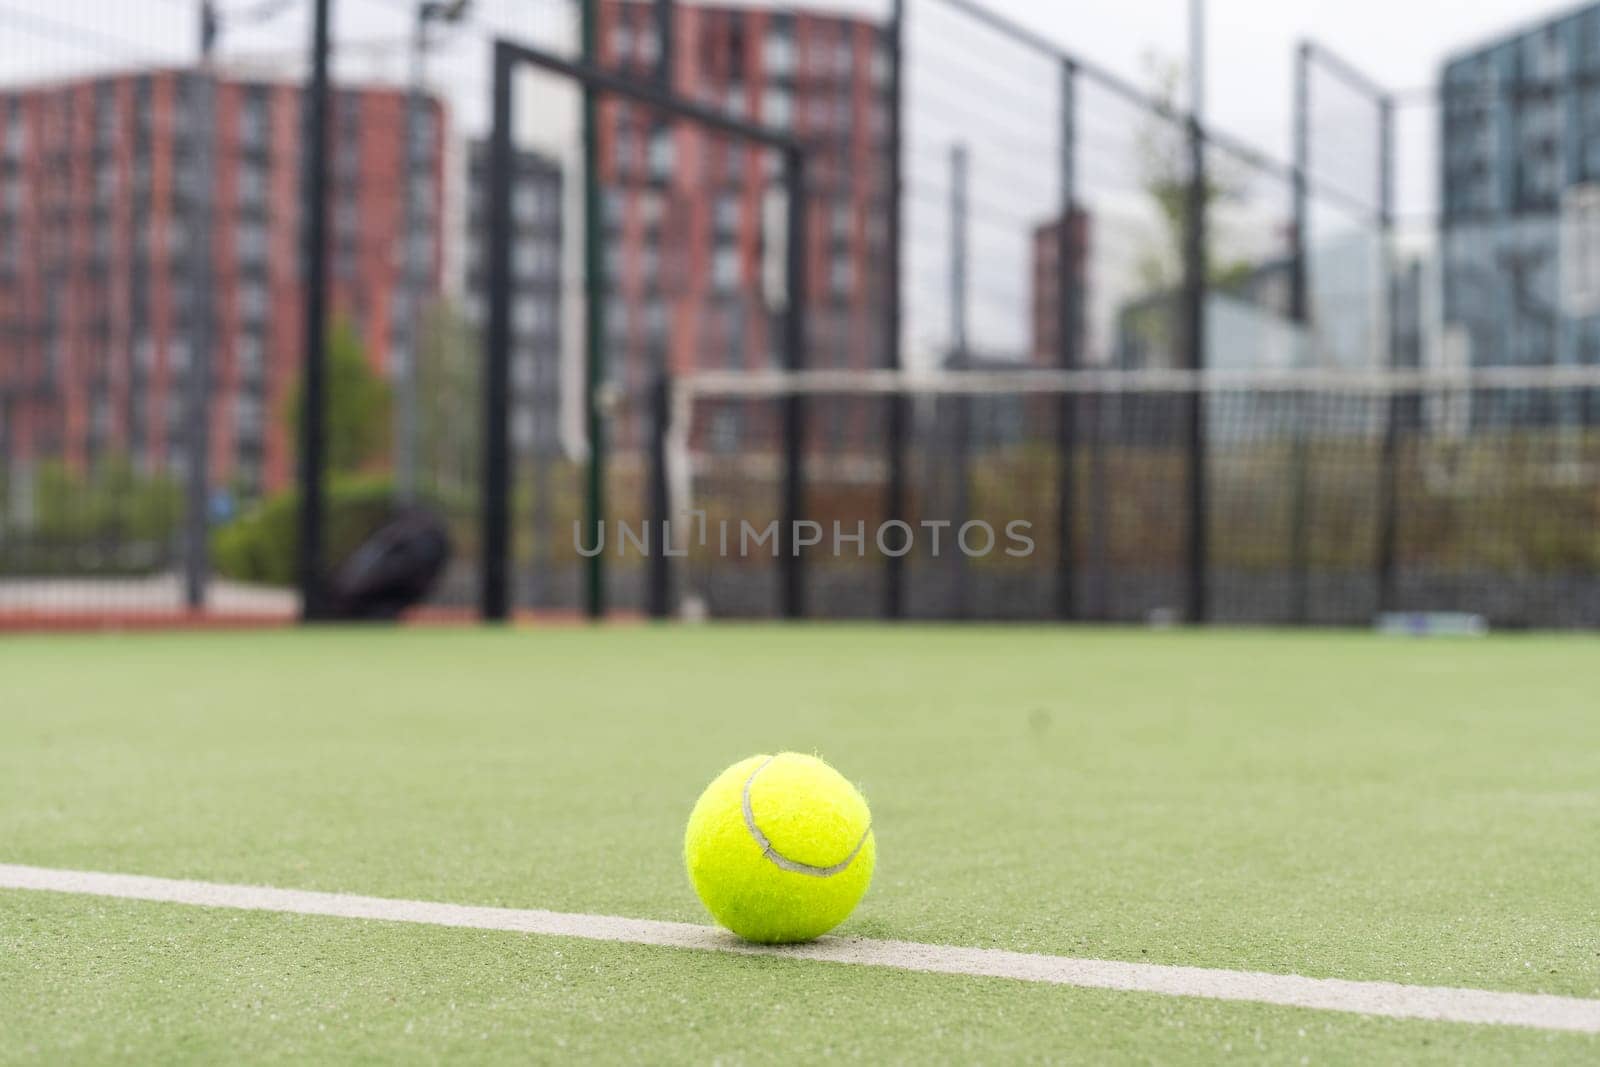 a picture of a tennis ball on the court by Andelov13